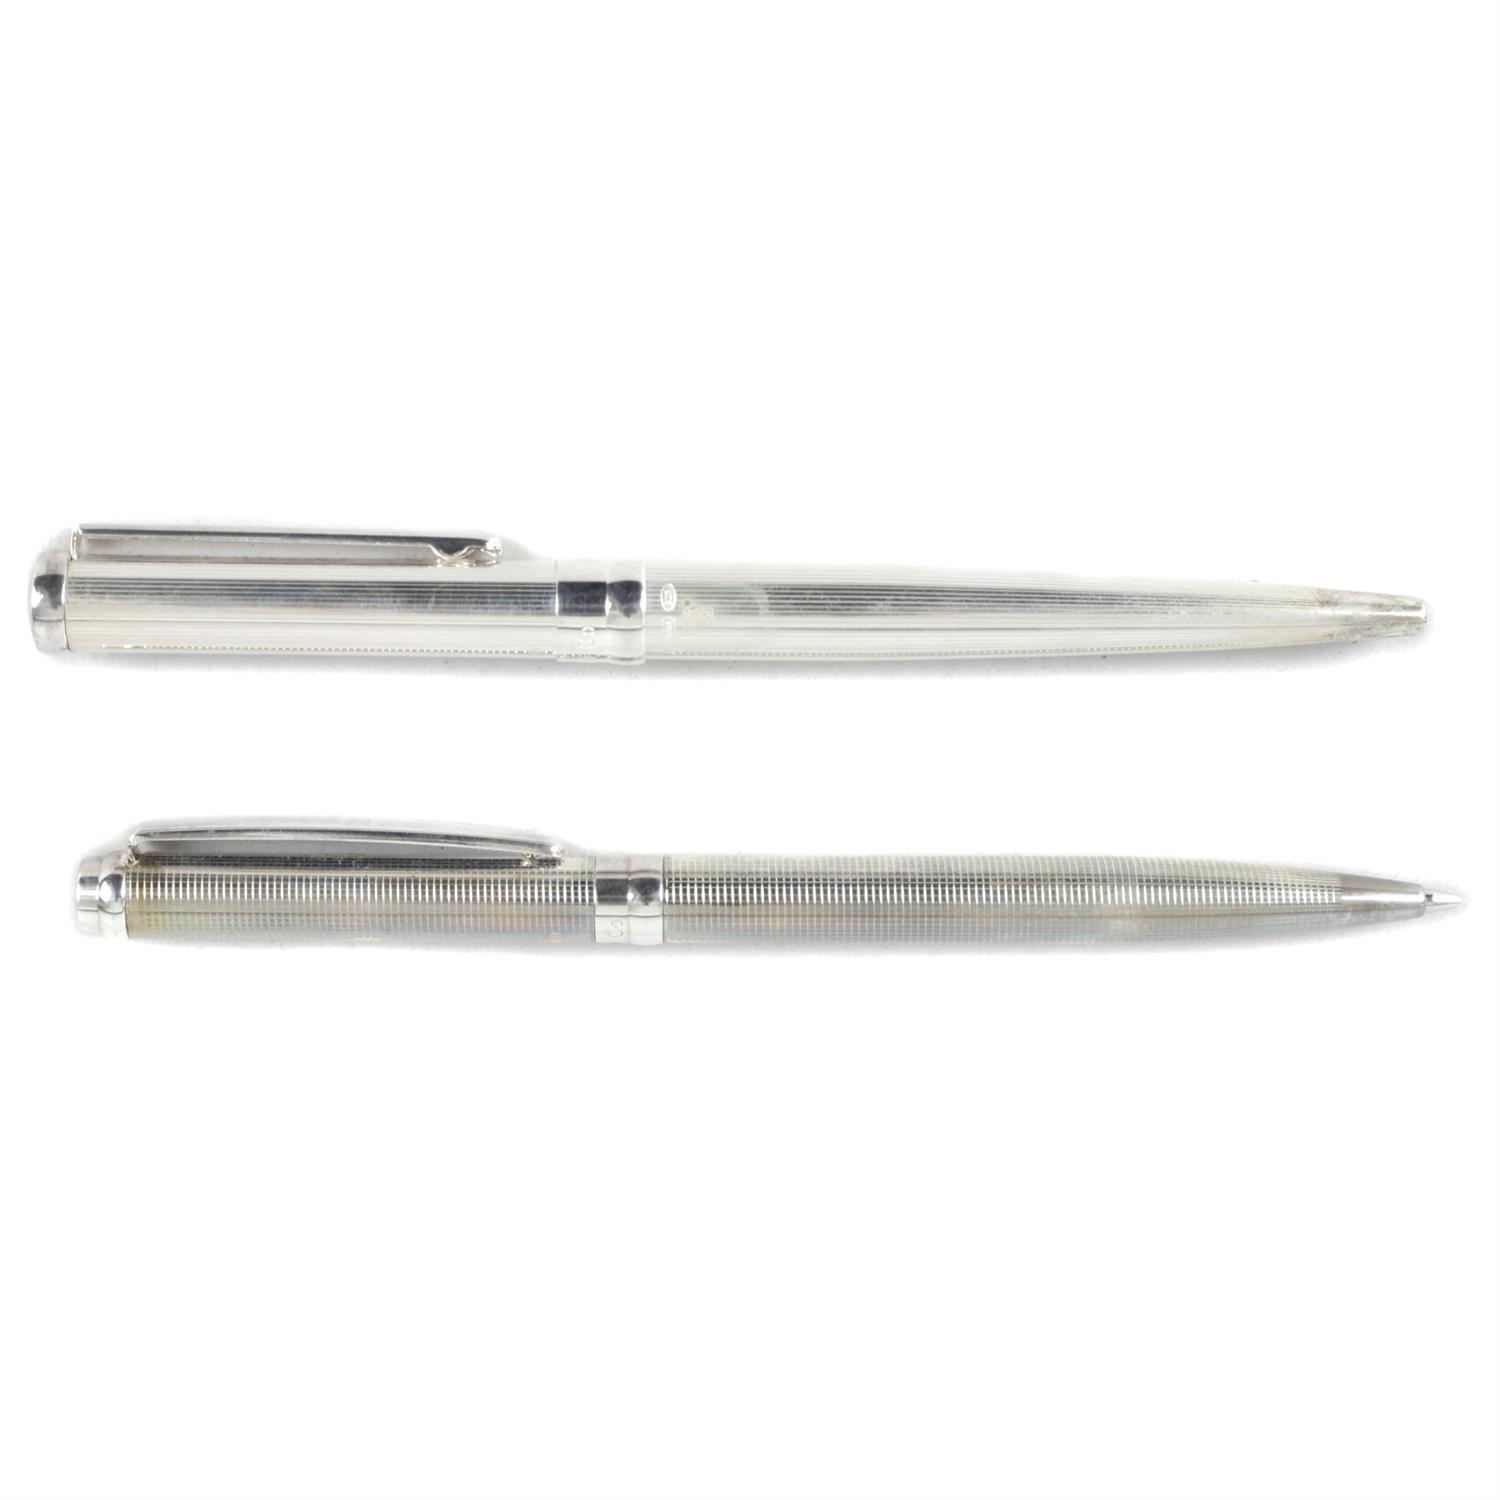 Two sterling silver Icon Pen pen and pencil sets - Image 2 of 2